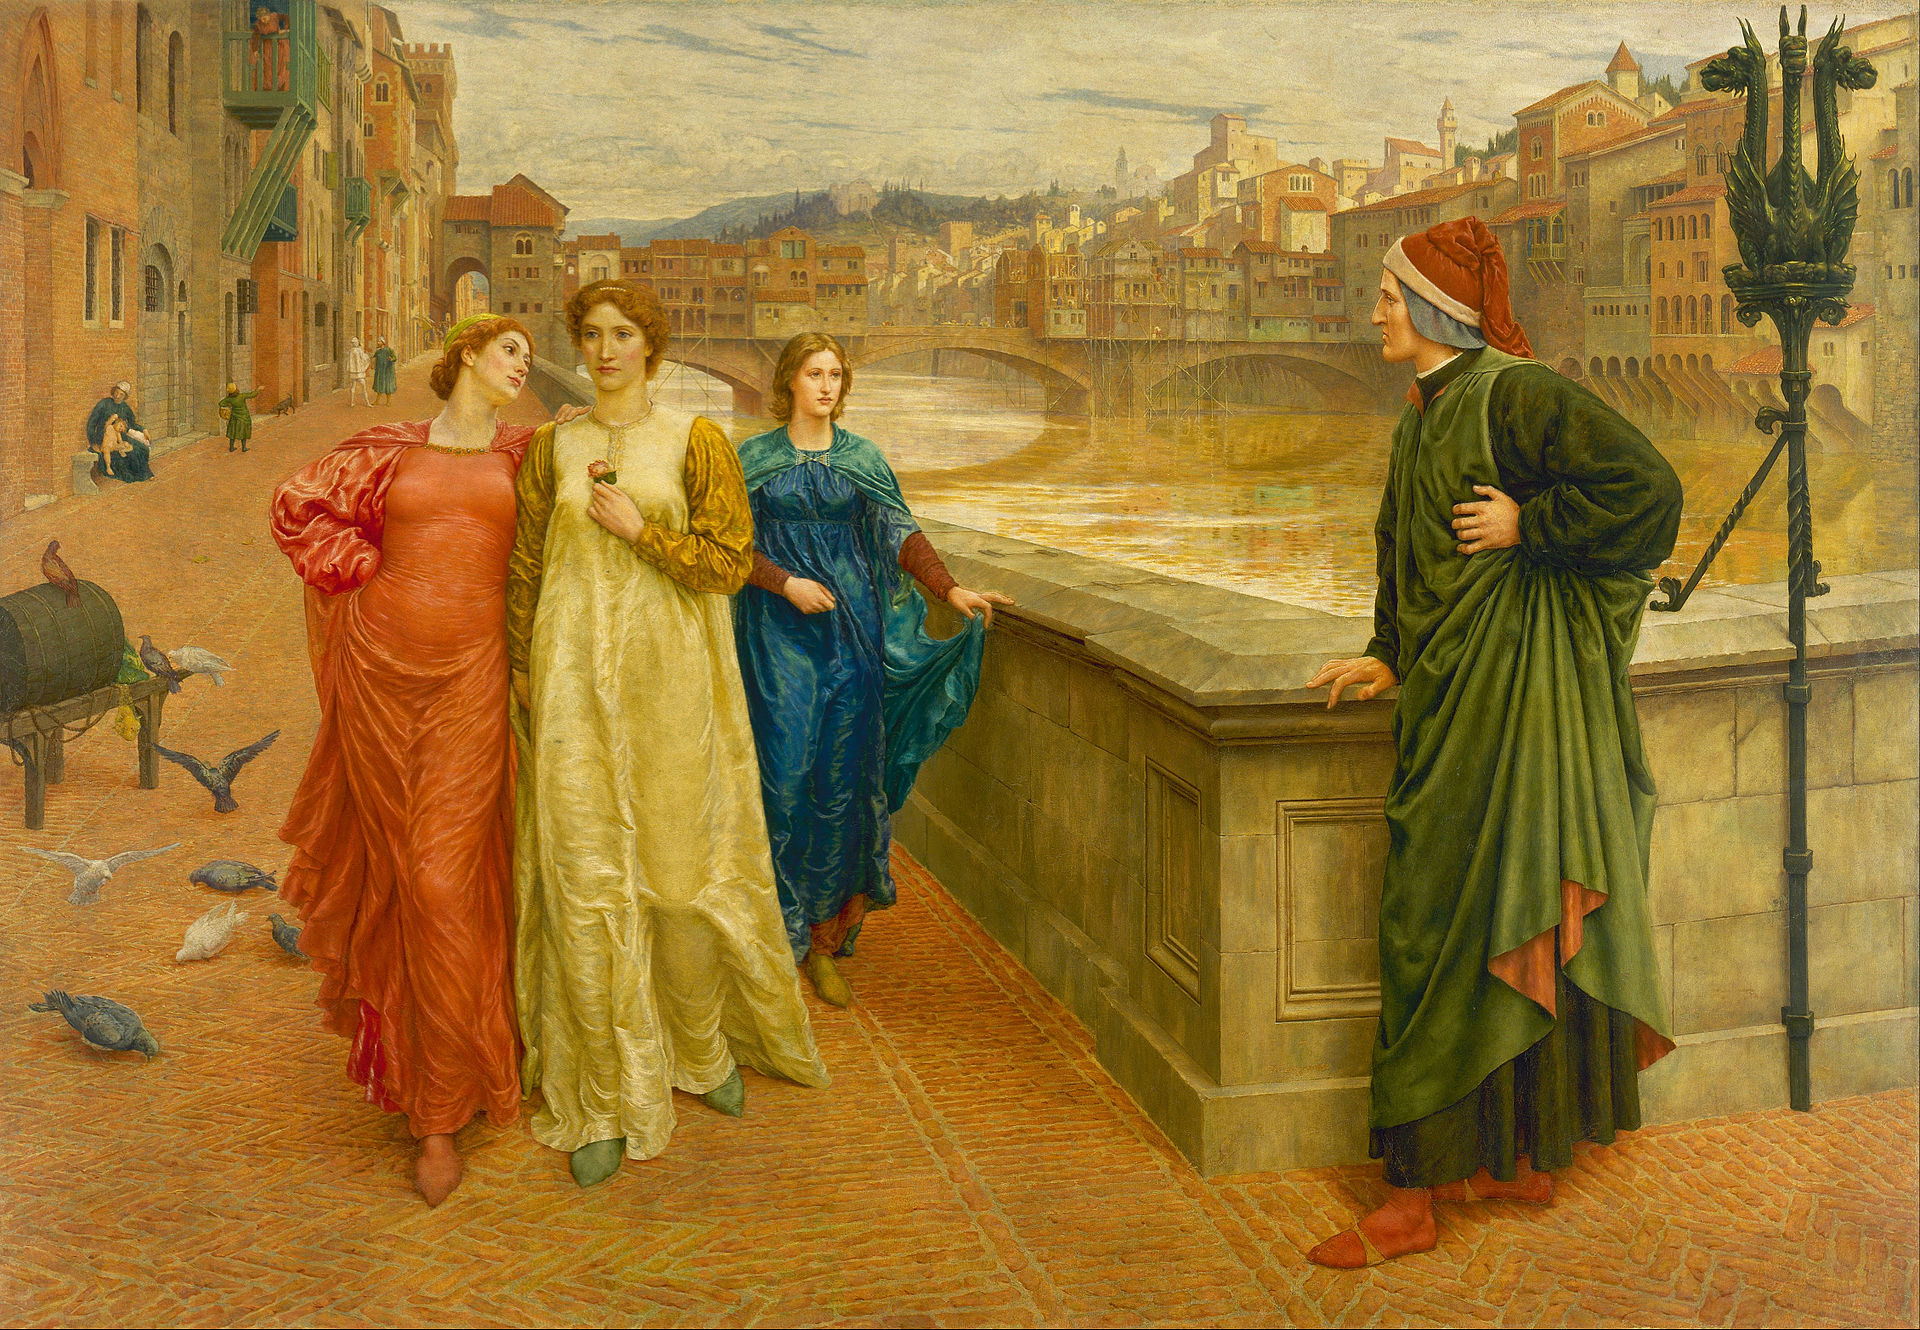 Dante e Beatrice by Henry Holiday - 1882/1884 - 142,2 x 203,2 cm 